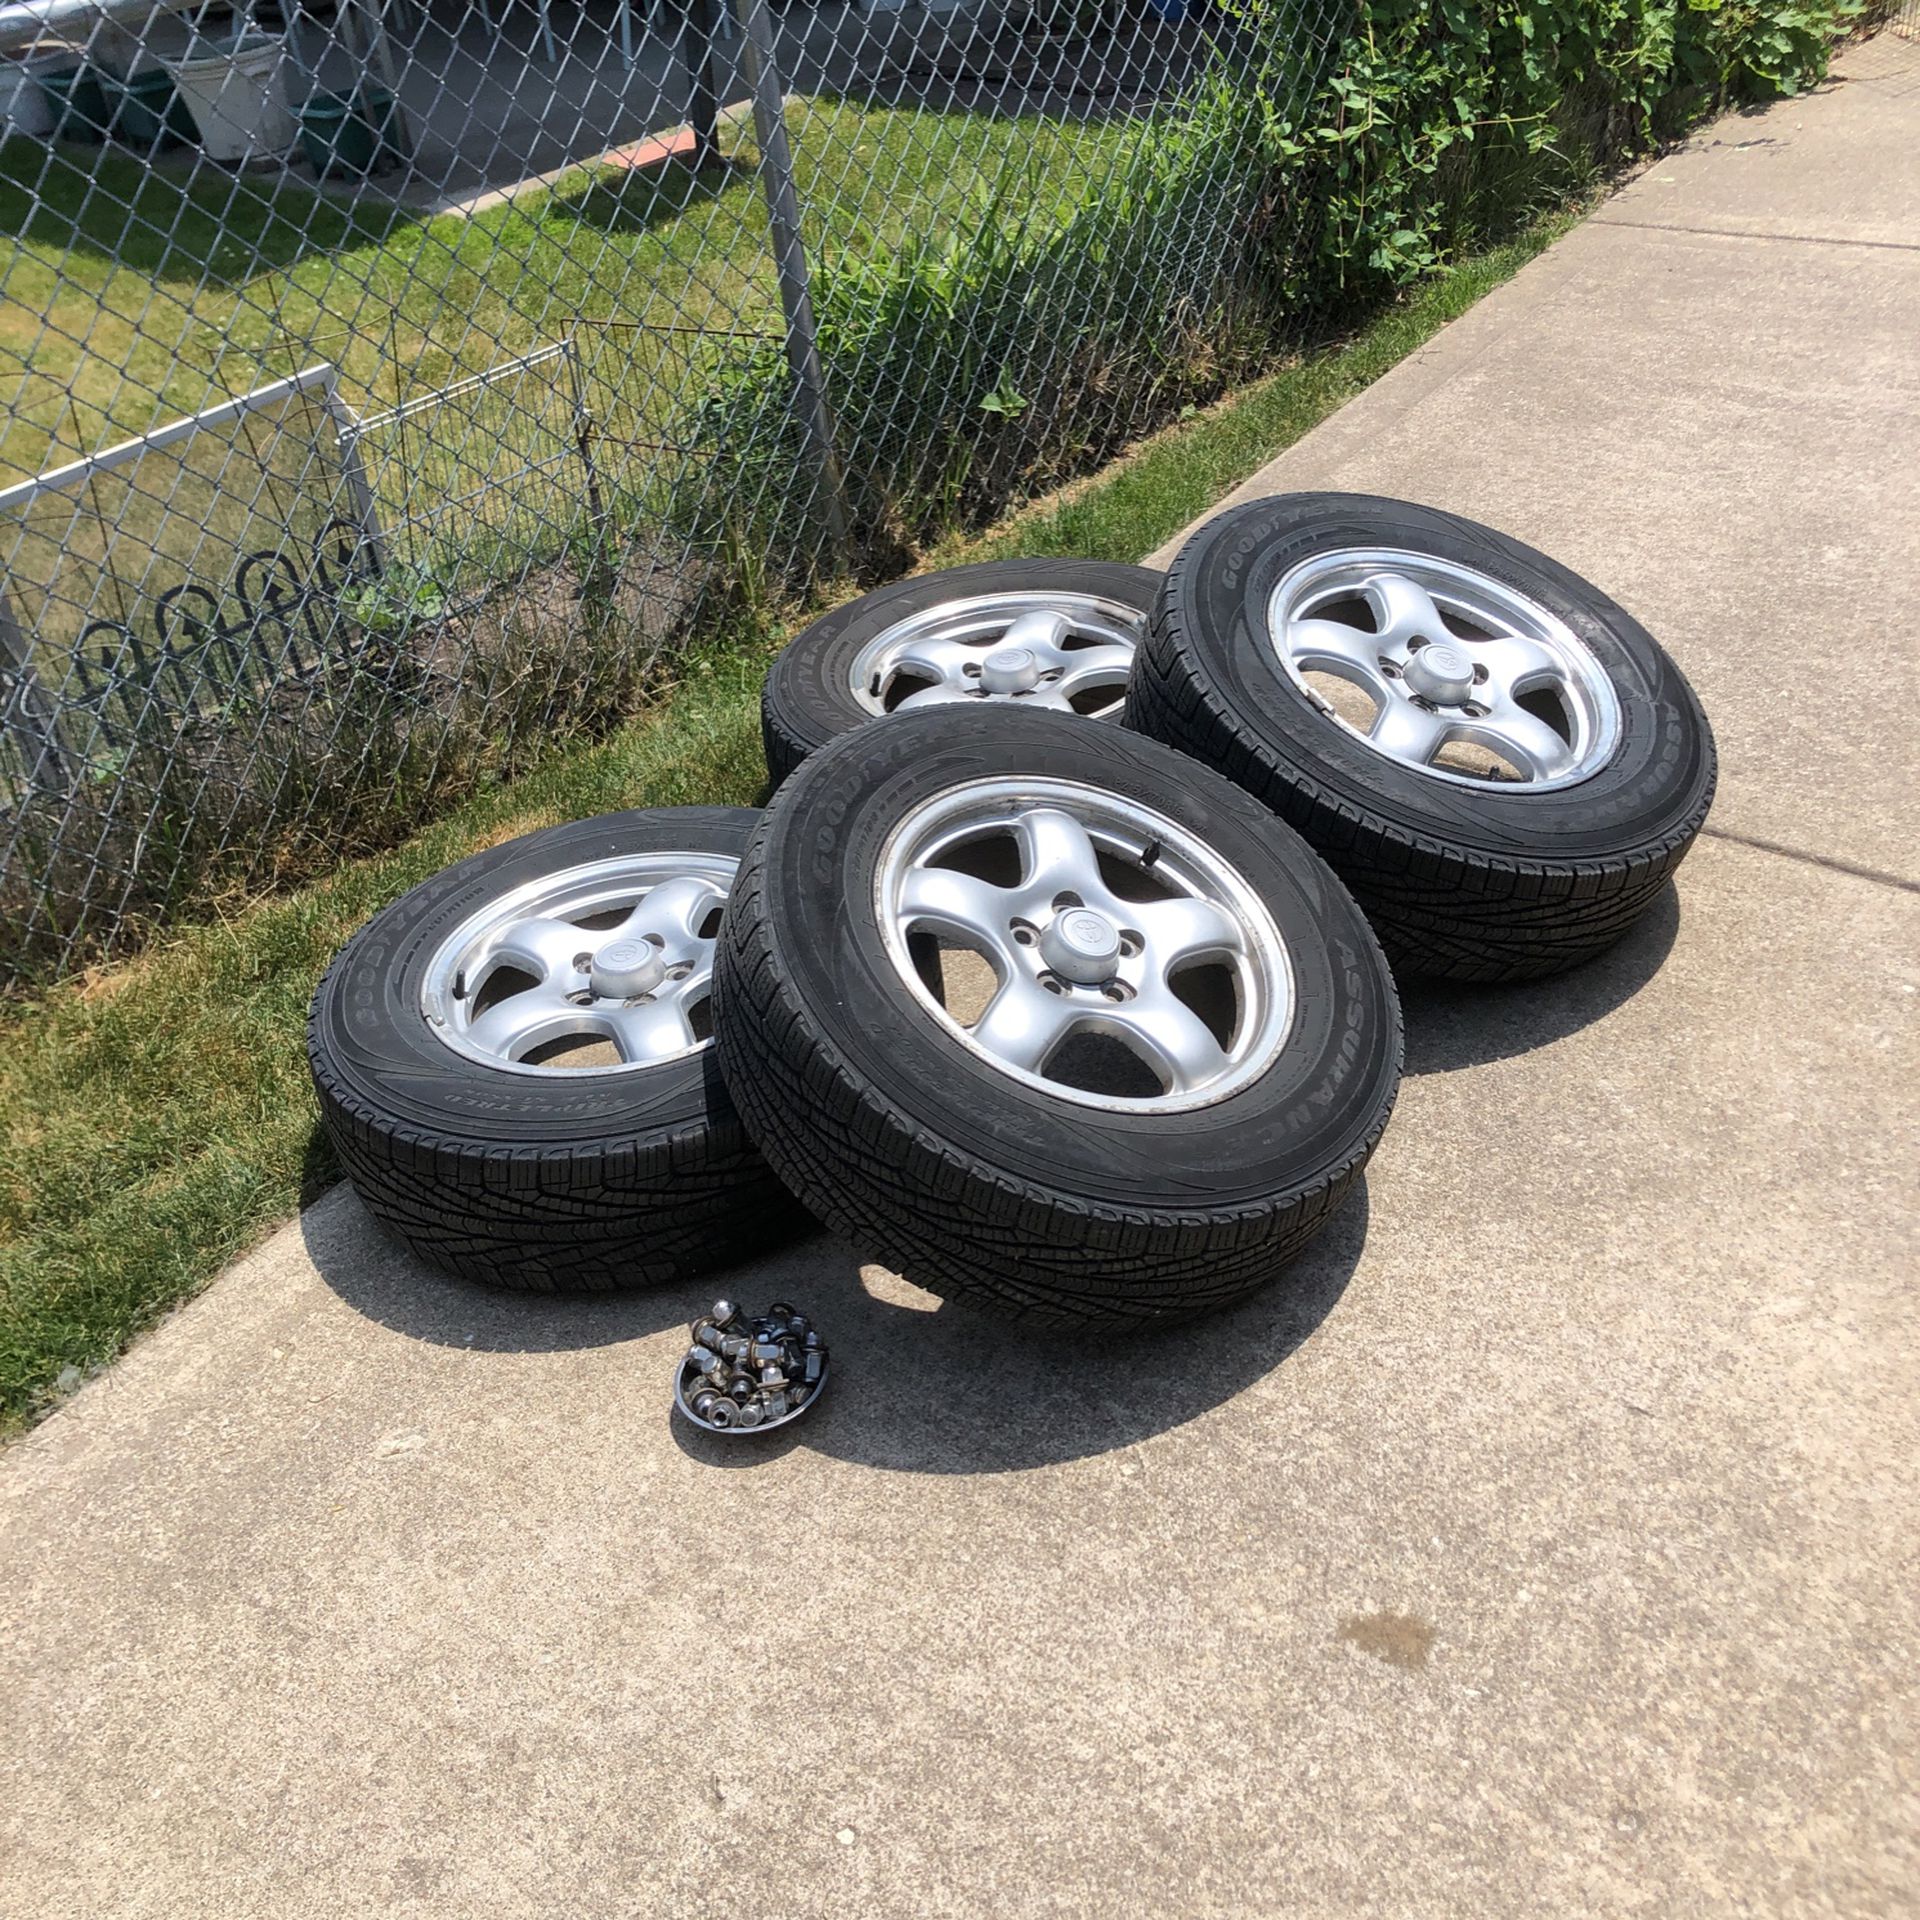 Set of four wheels/rims and tires off of a 1997 Toyota RAV4 four-wheel-drive